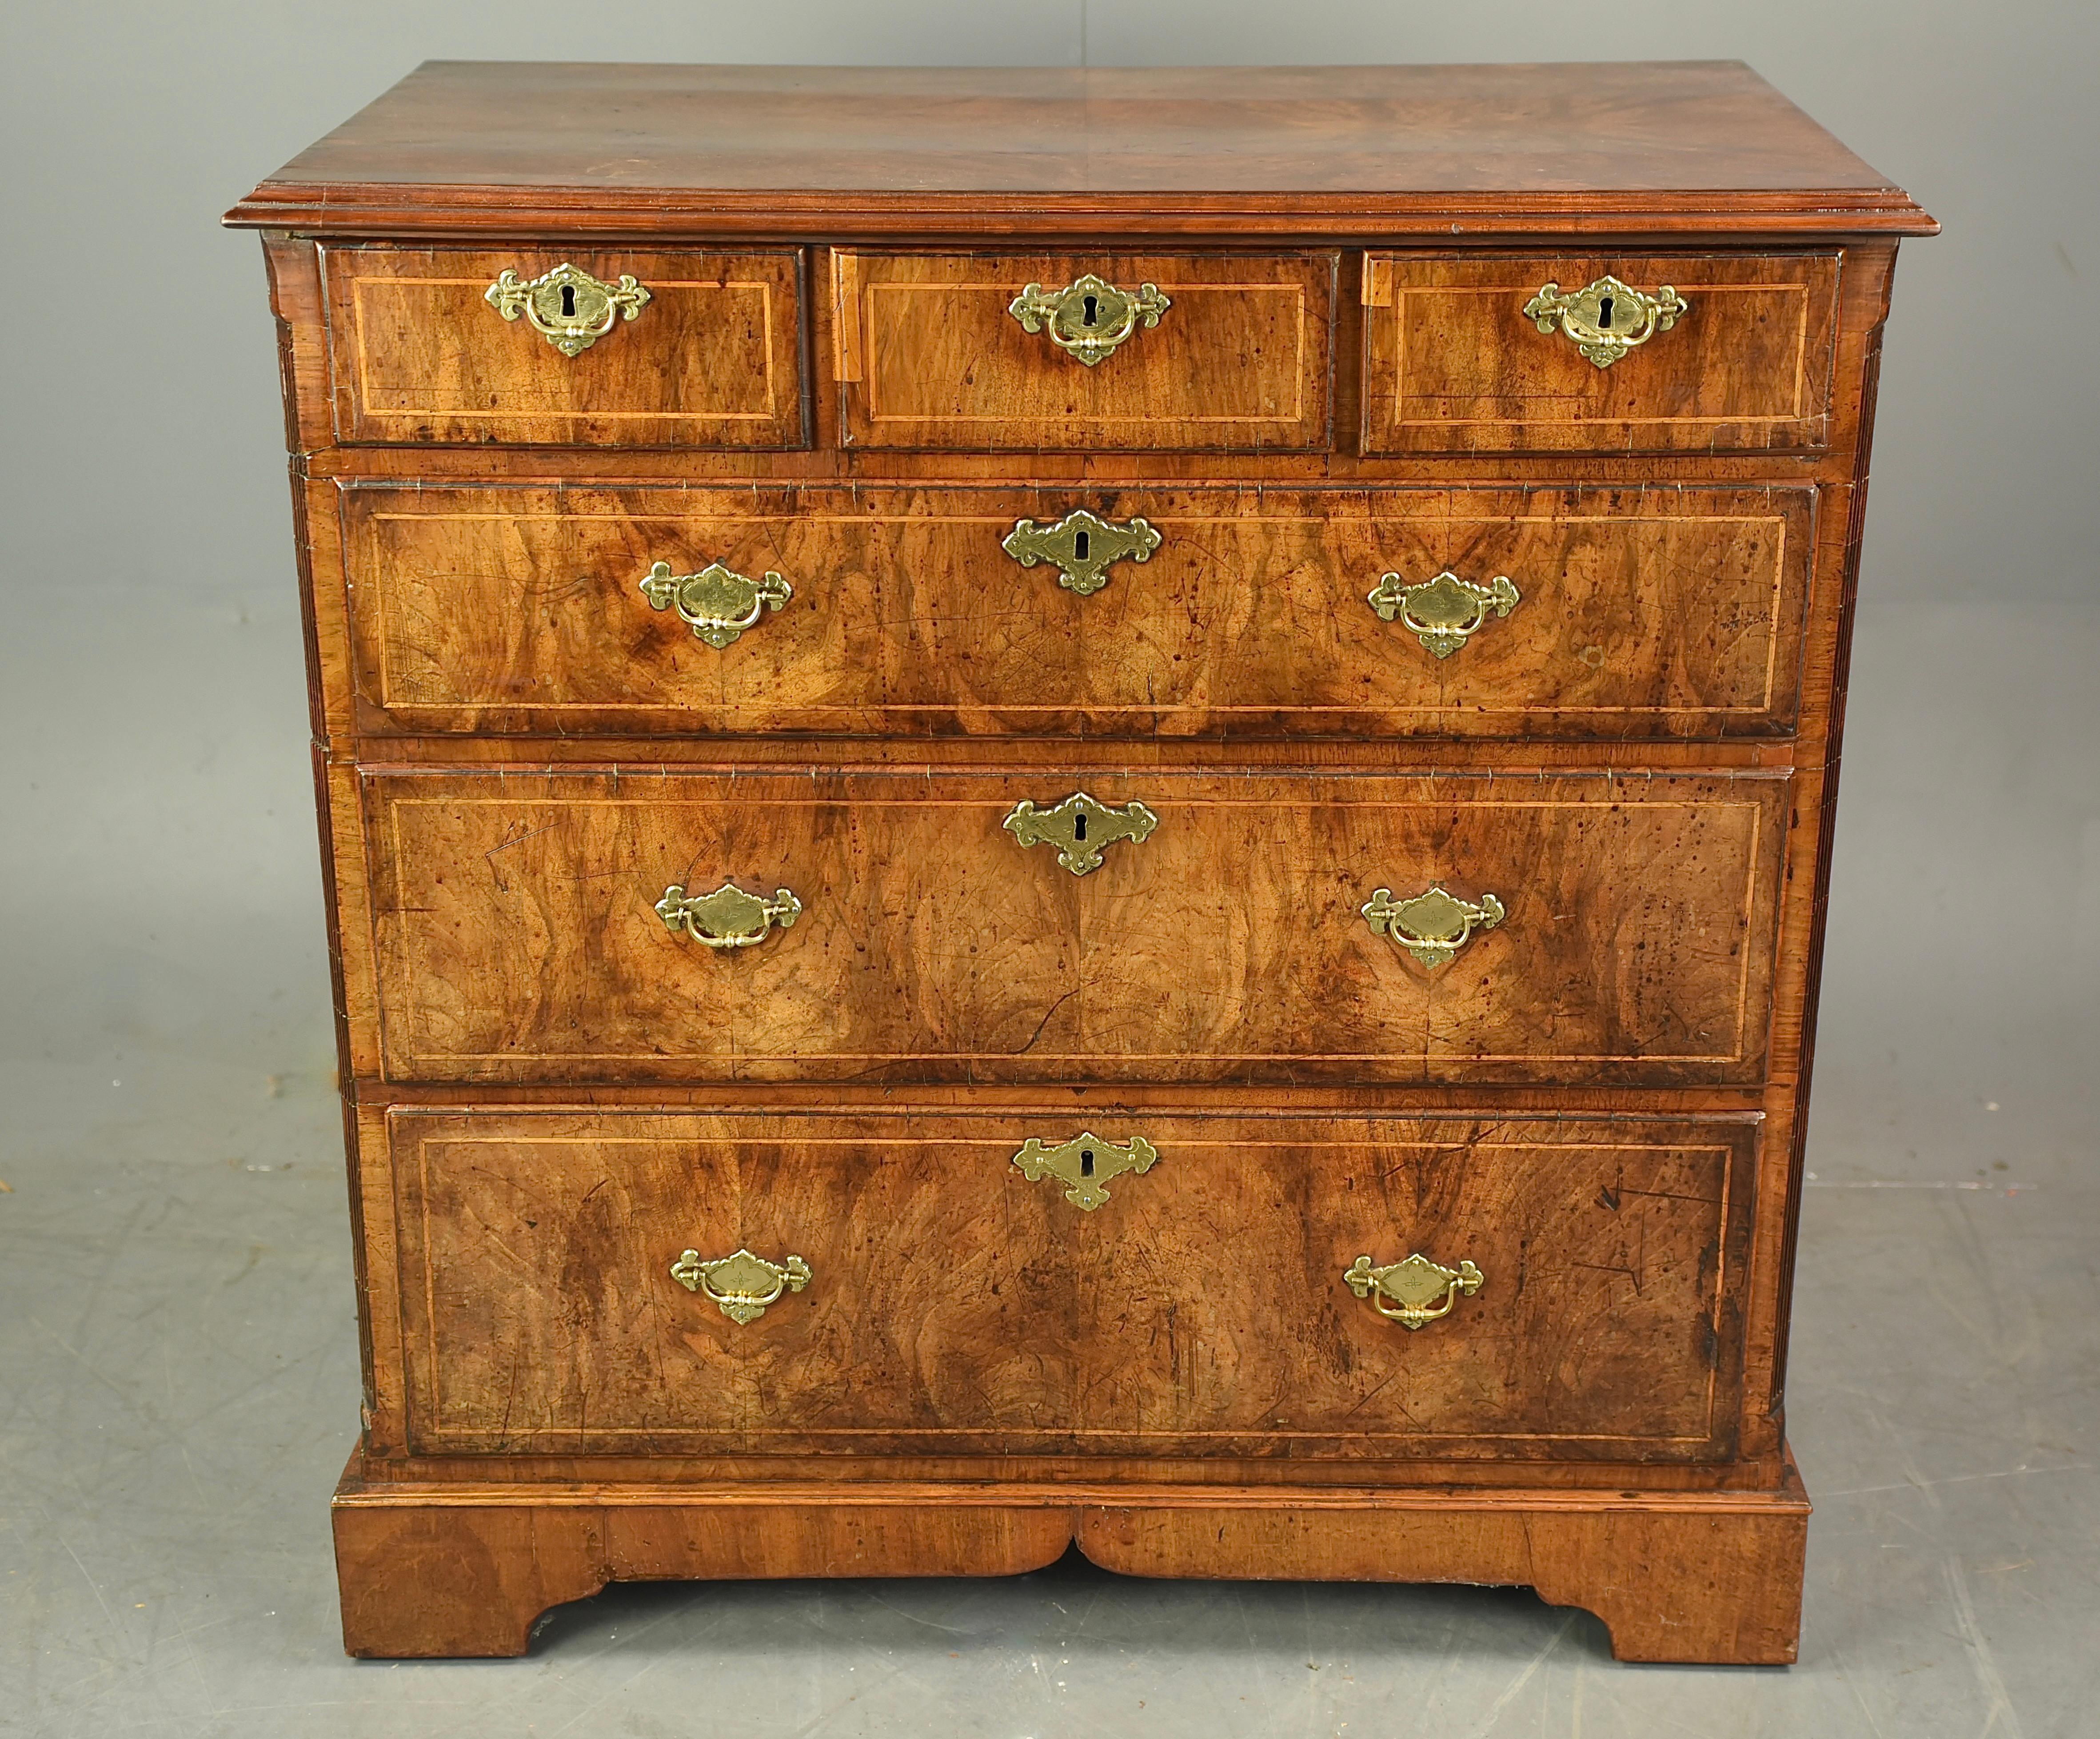 Fine quality early 18th century walnut chest of drawers circa 1730 .
The chest consists of three small drawers over 3 full width drawers that are all oak lined with engraved plate handles , All drawers are solid and slide nice and smooth as they